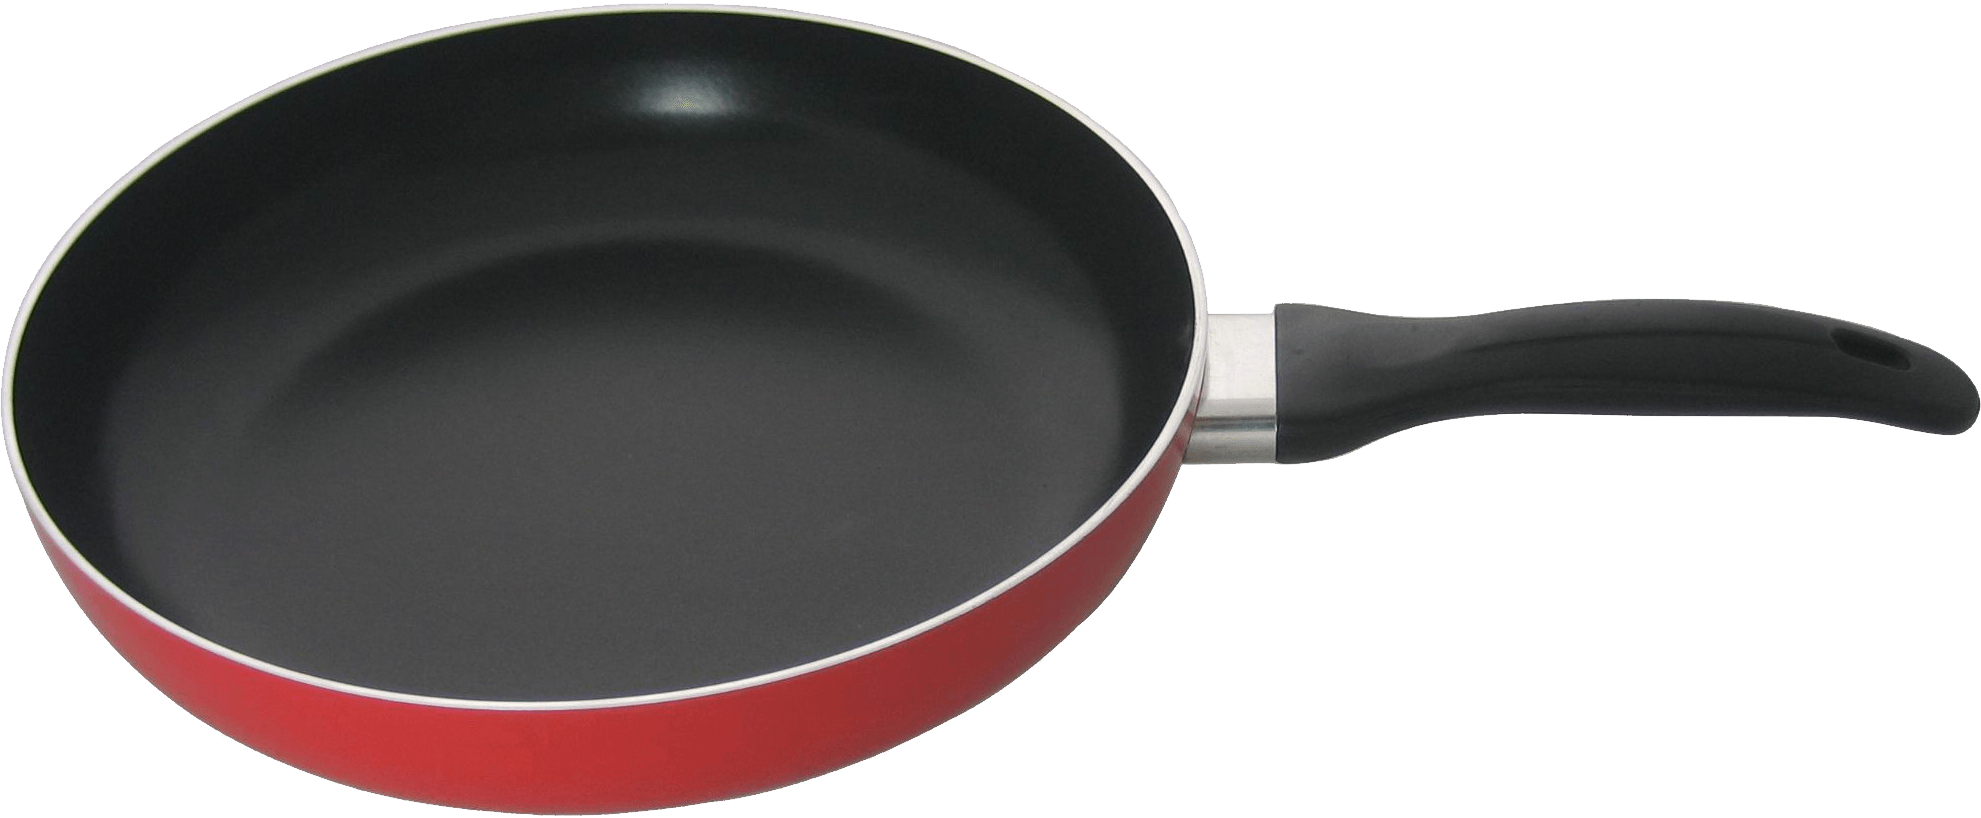 Frying Pan PNG Image Background